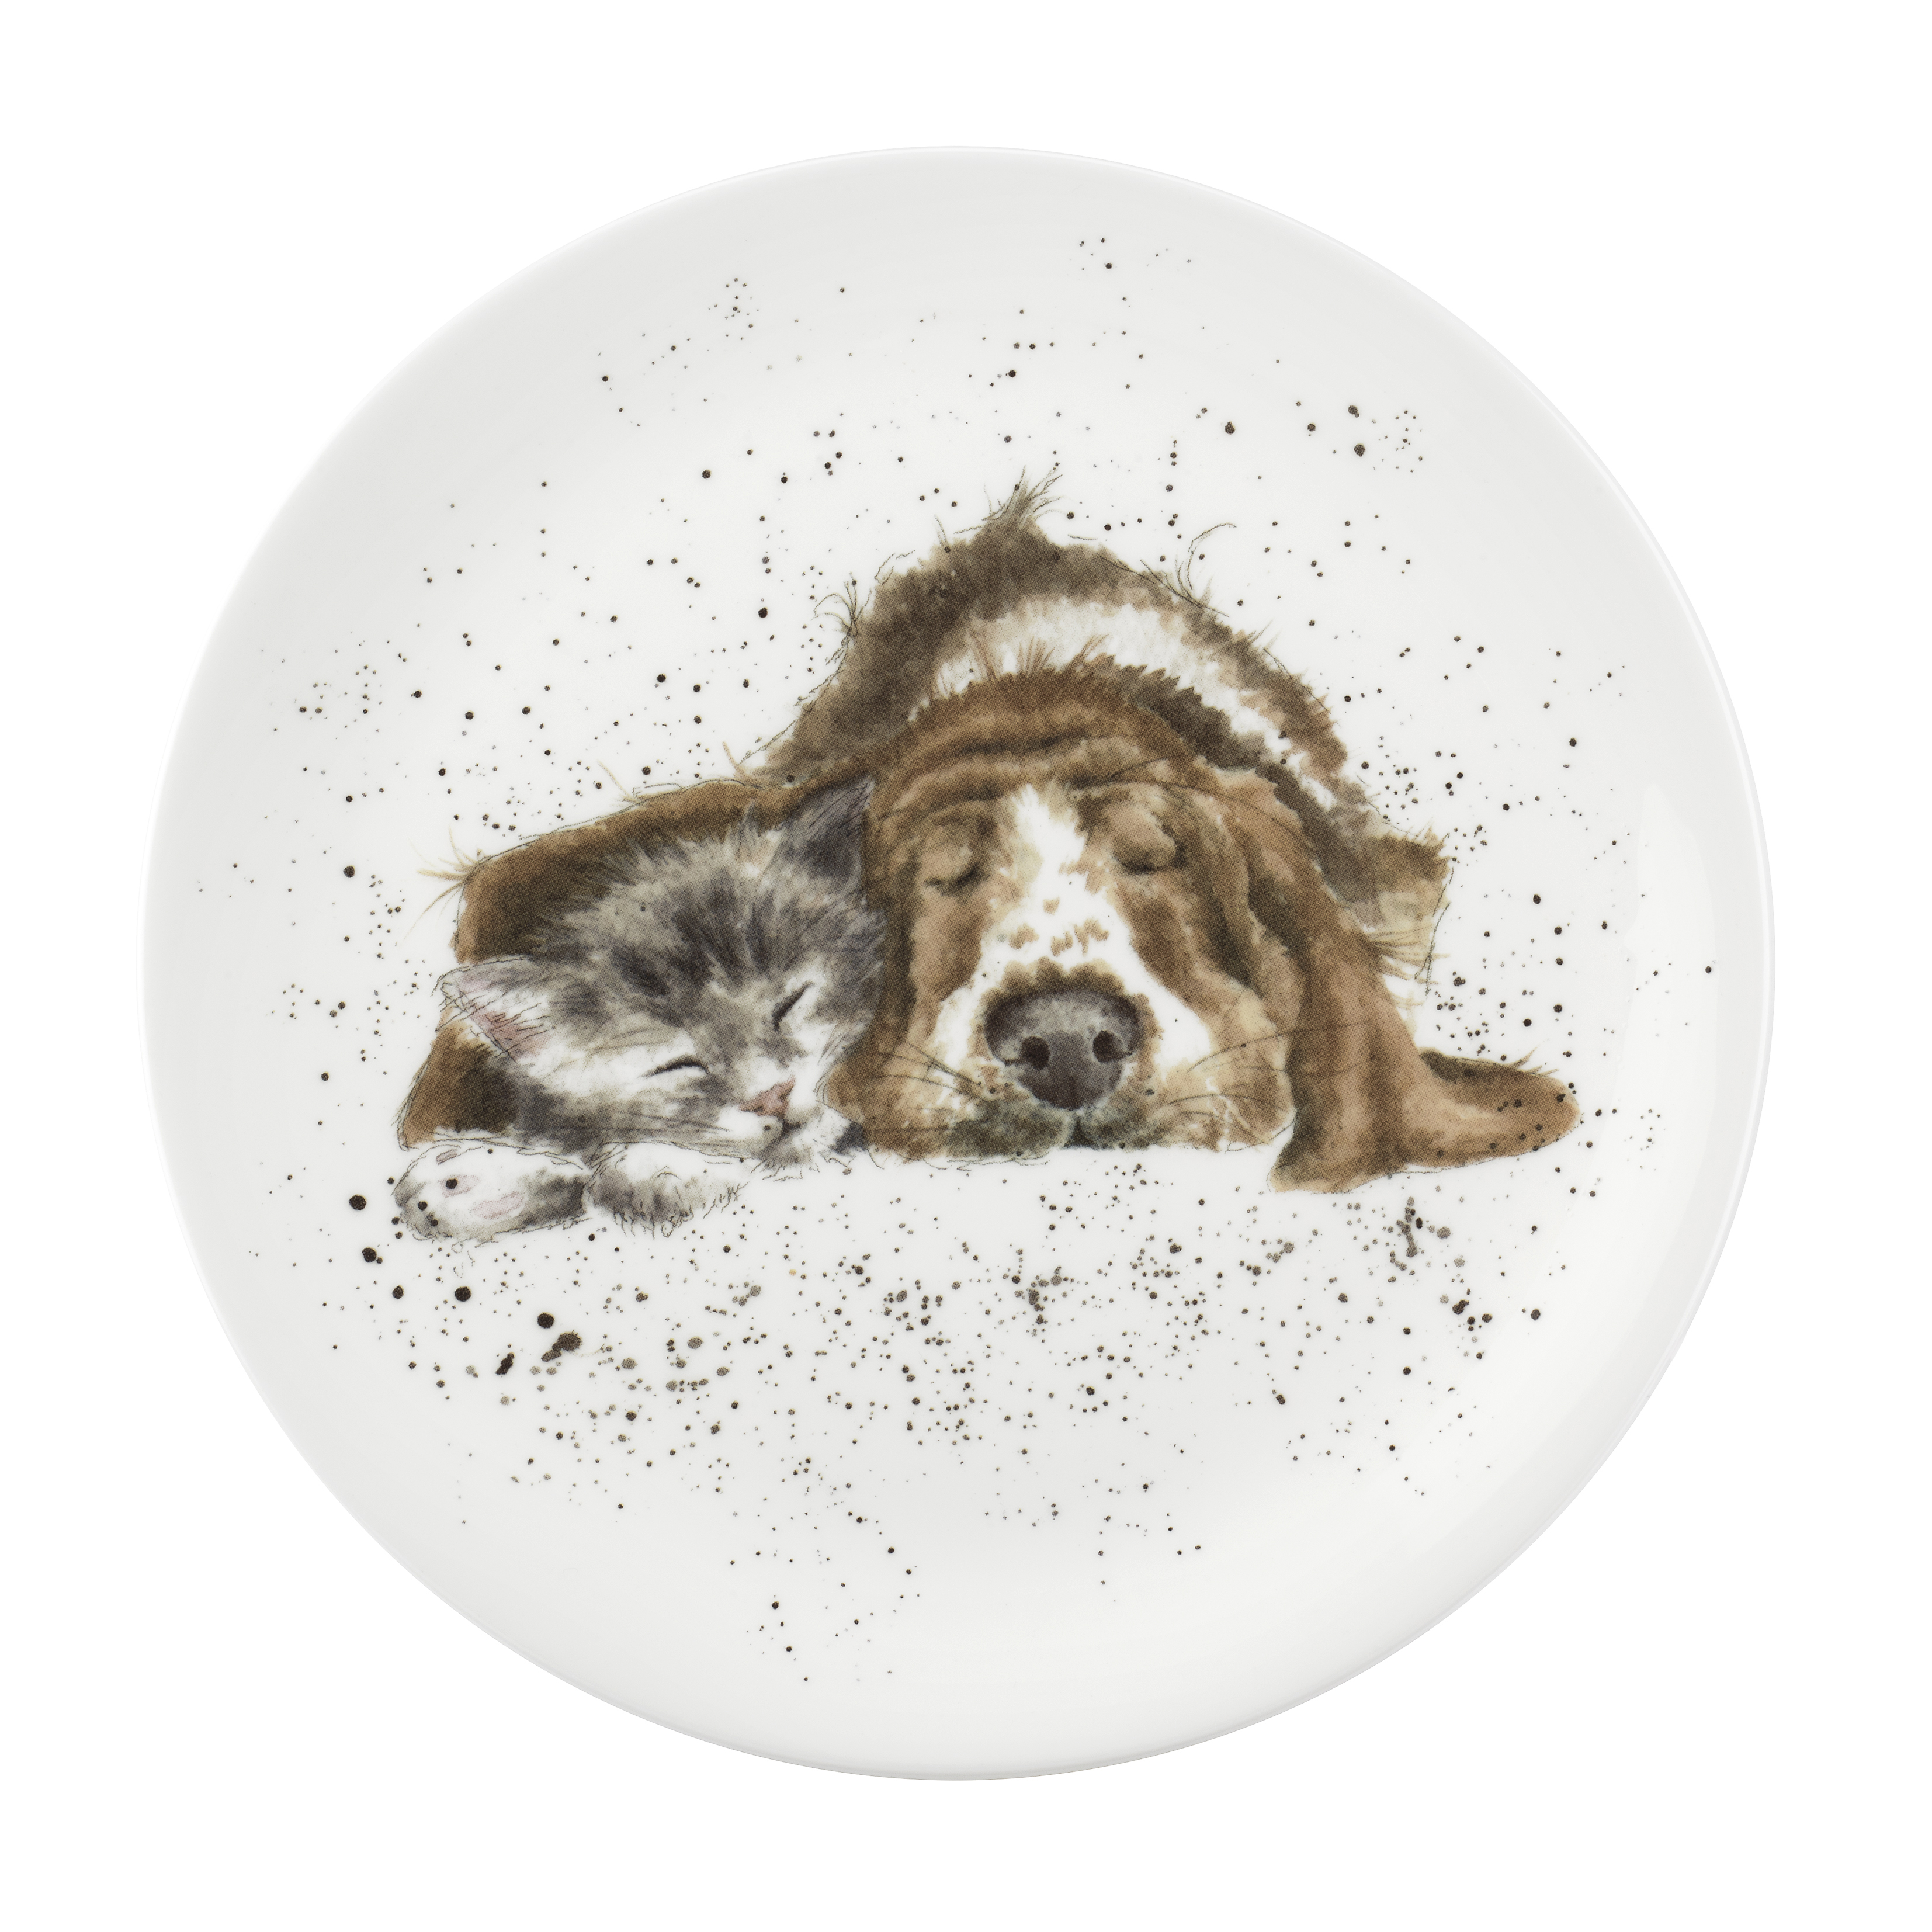 Wrendale Designs Dog & Catnap 8 Inch Plate, Dog & Cat image number null